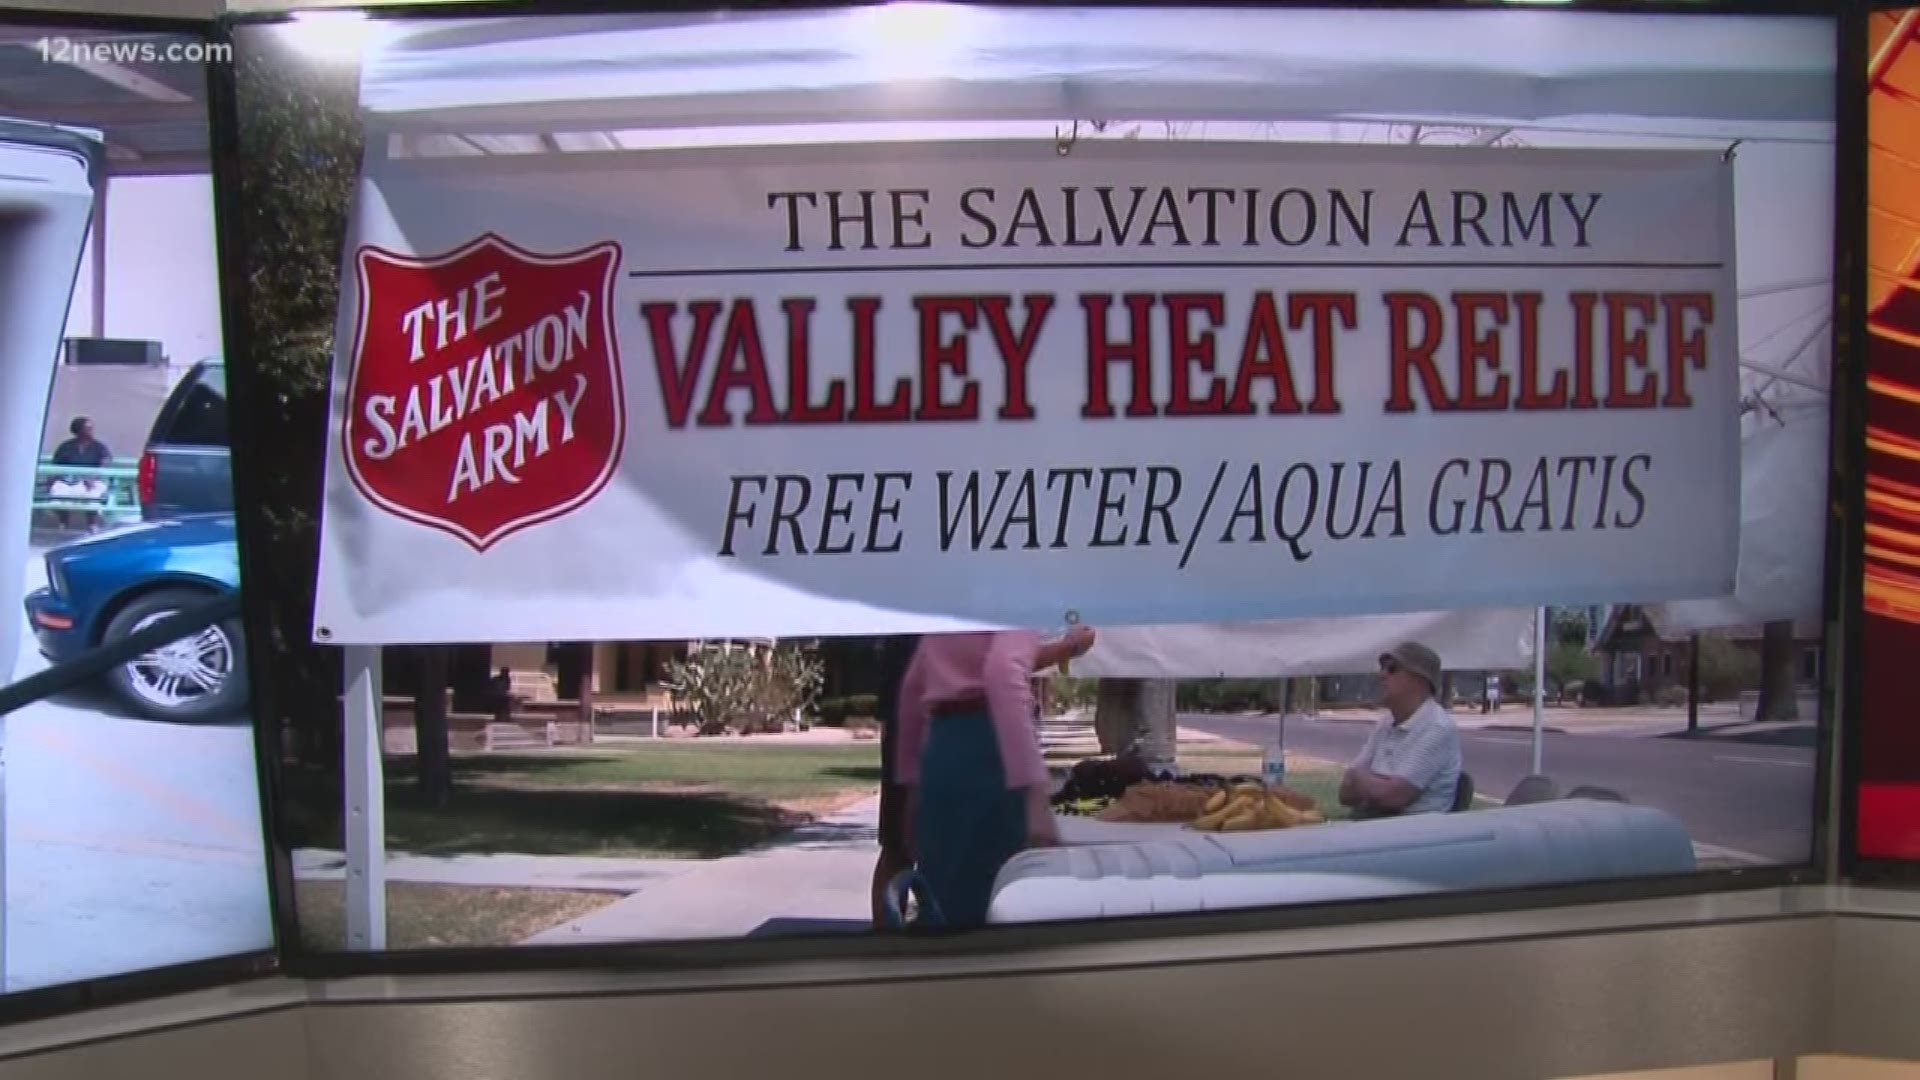 The Salvation Army's Red Shield Survival Squad is activating 13 heat relief stations across the Valley. Anyone can go there to cool off and get water.